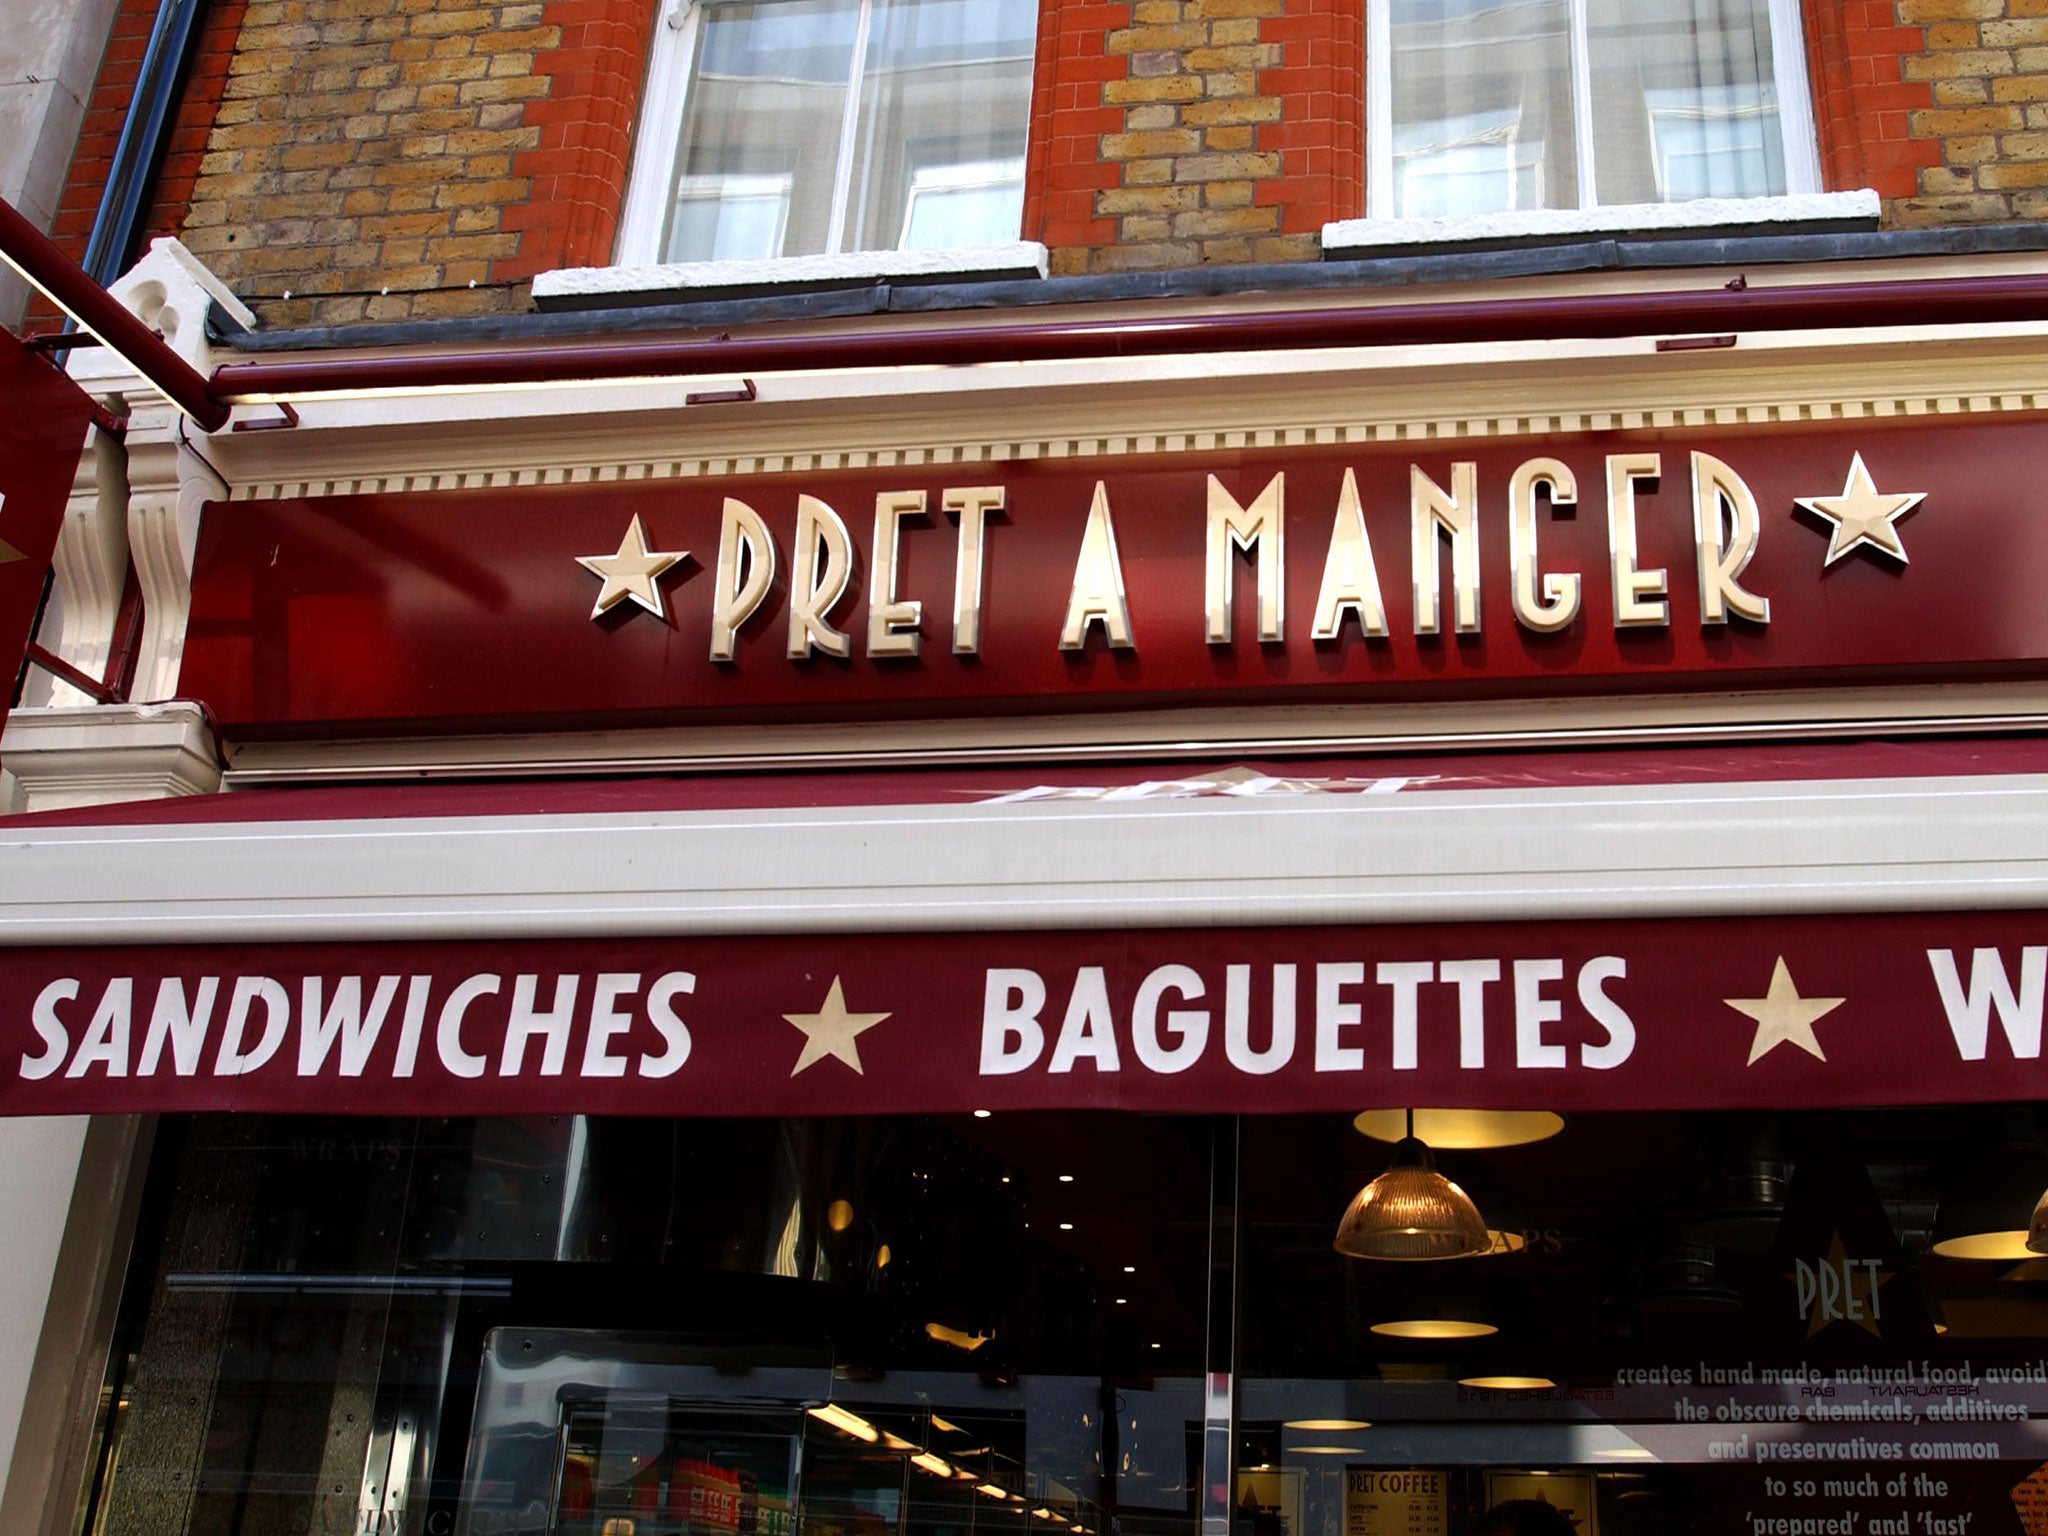 Staff at Pret are told to hand out a certain amount of free coffees each week 